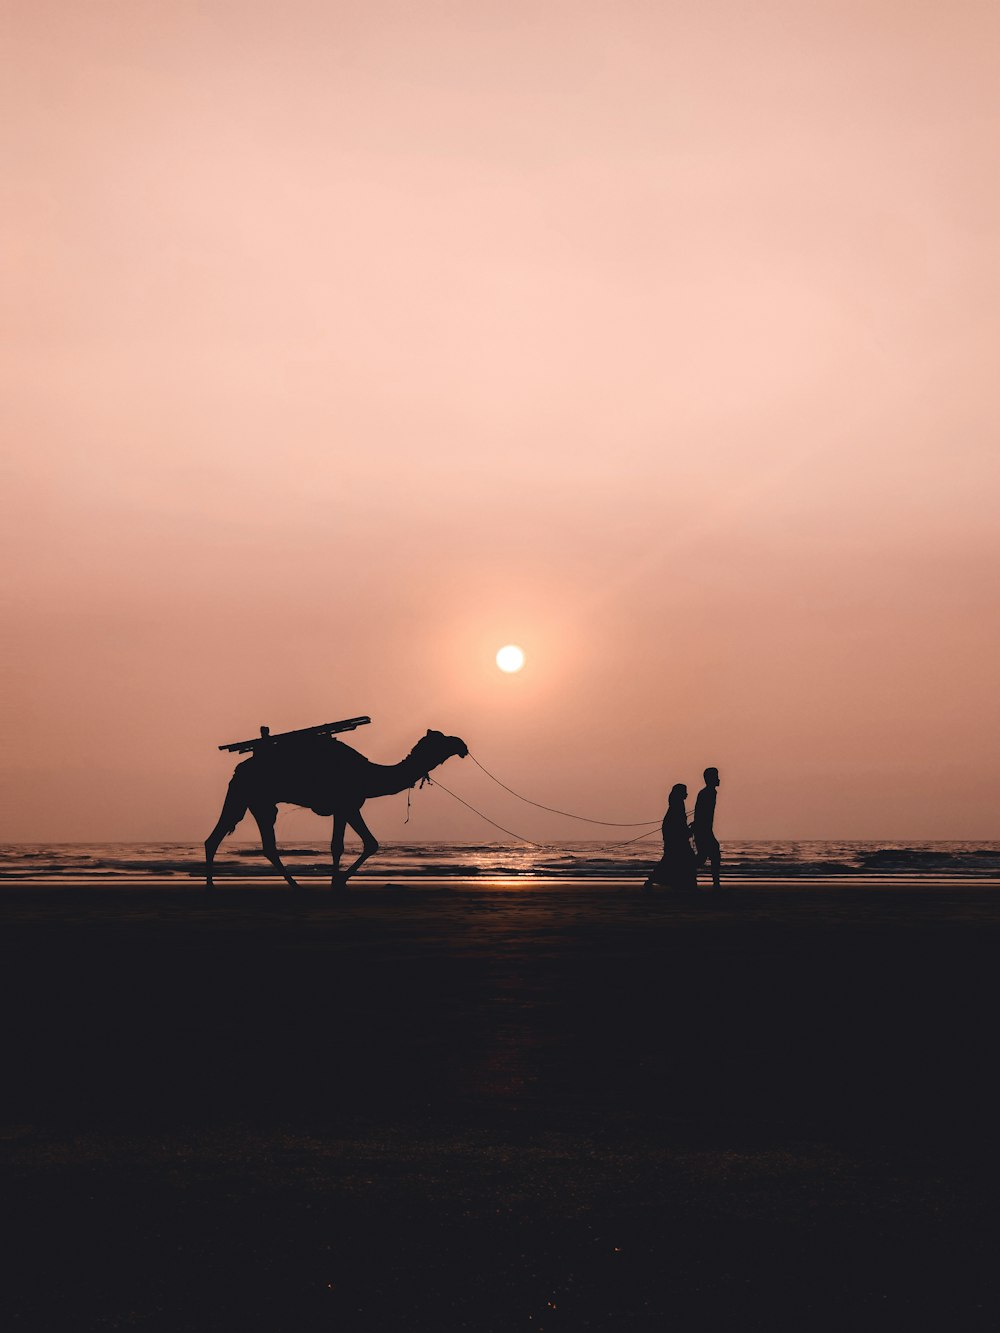 silhouette of 2 people riding horse during sunset